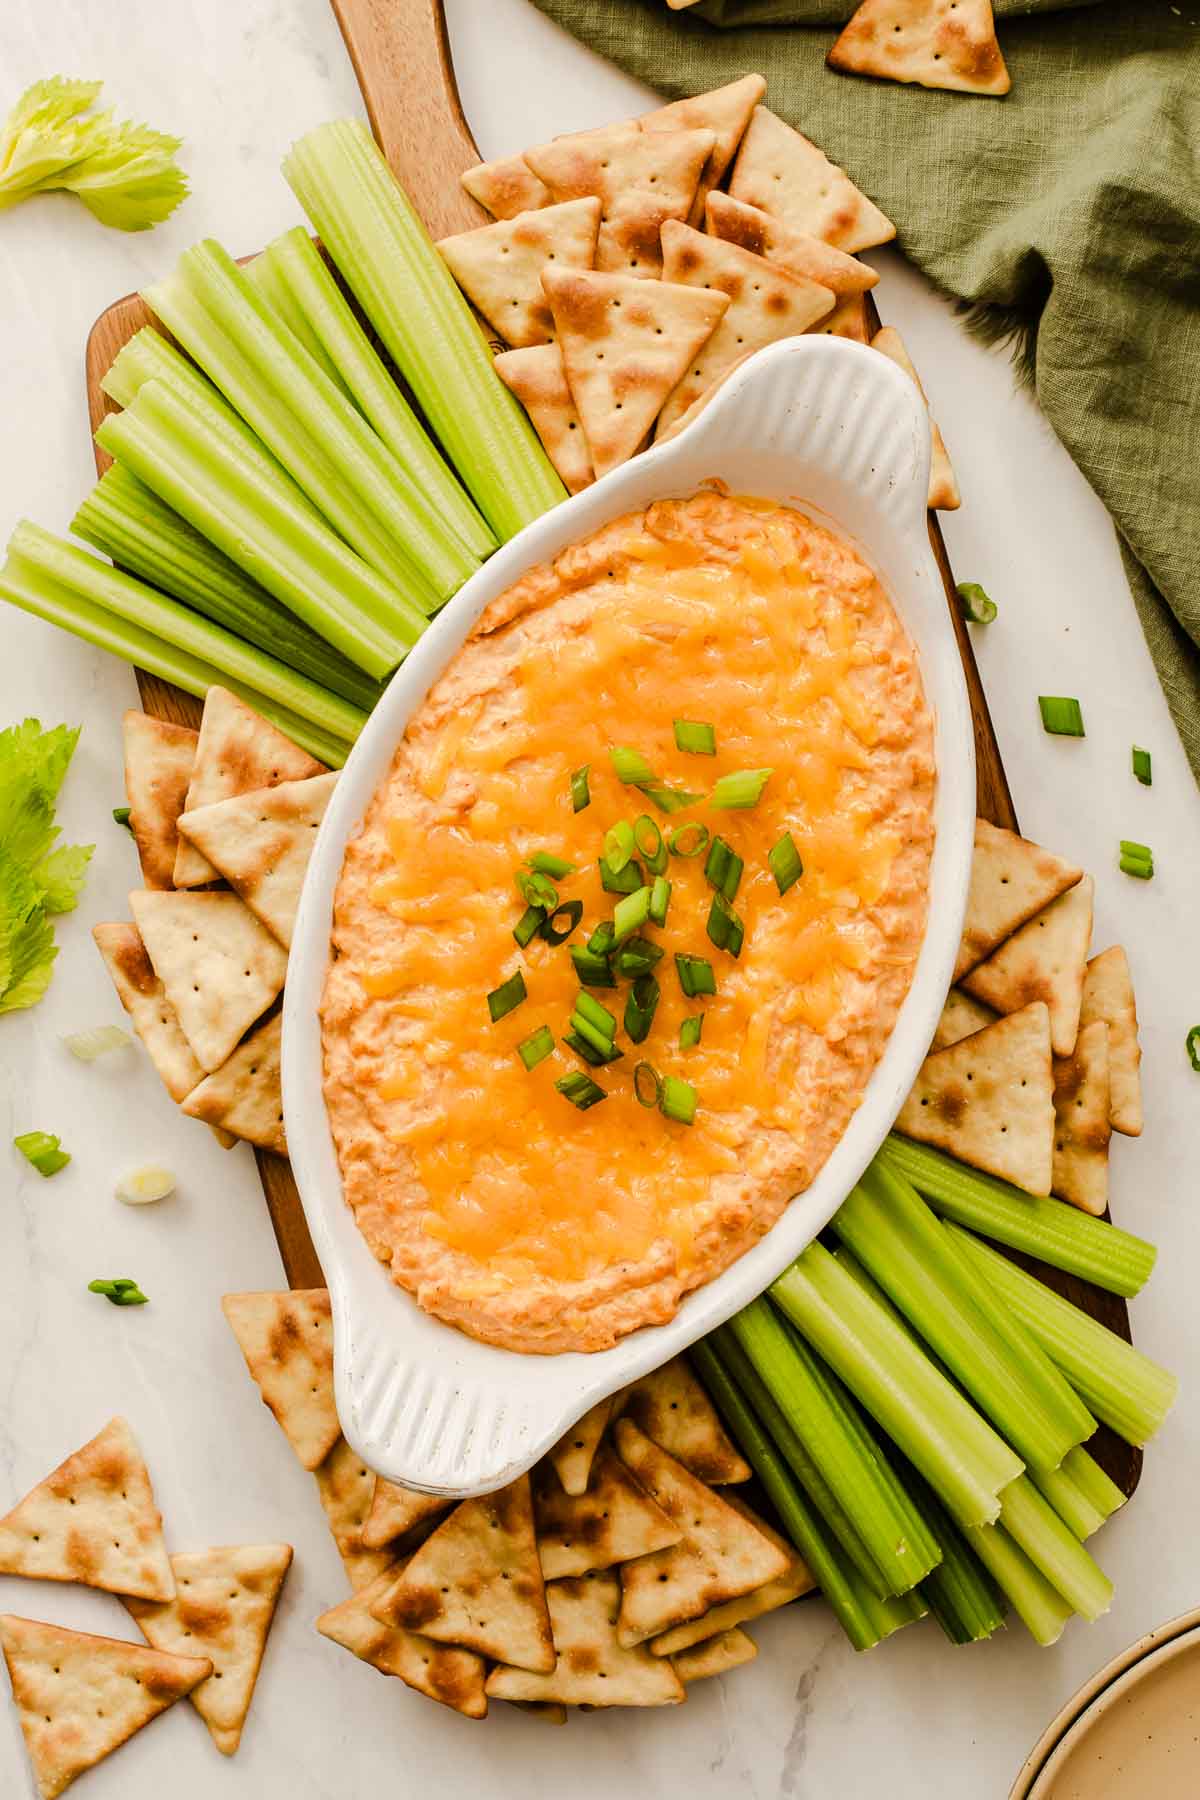 Overhead shot of buffalo chickpea dip in oval bowl with celery sticks and pitas on side.